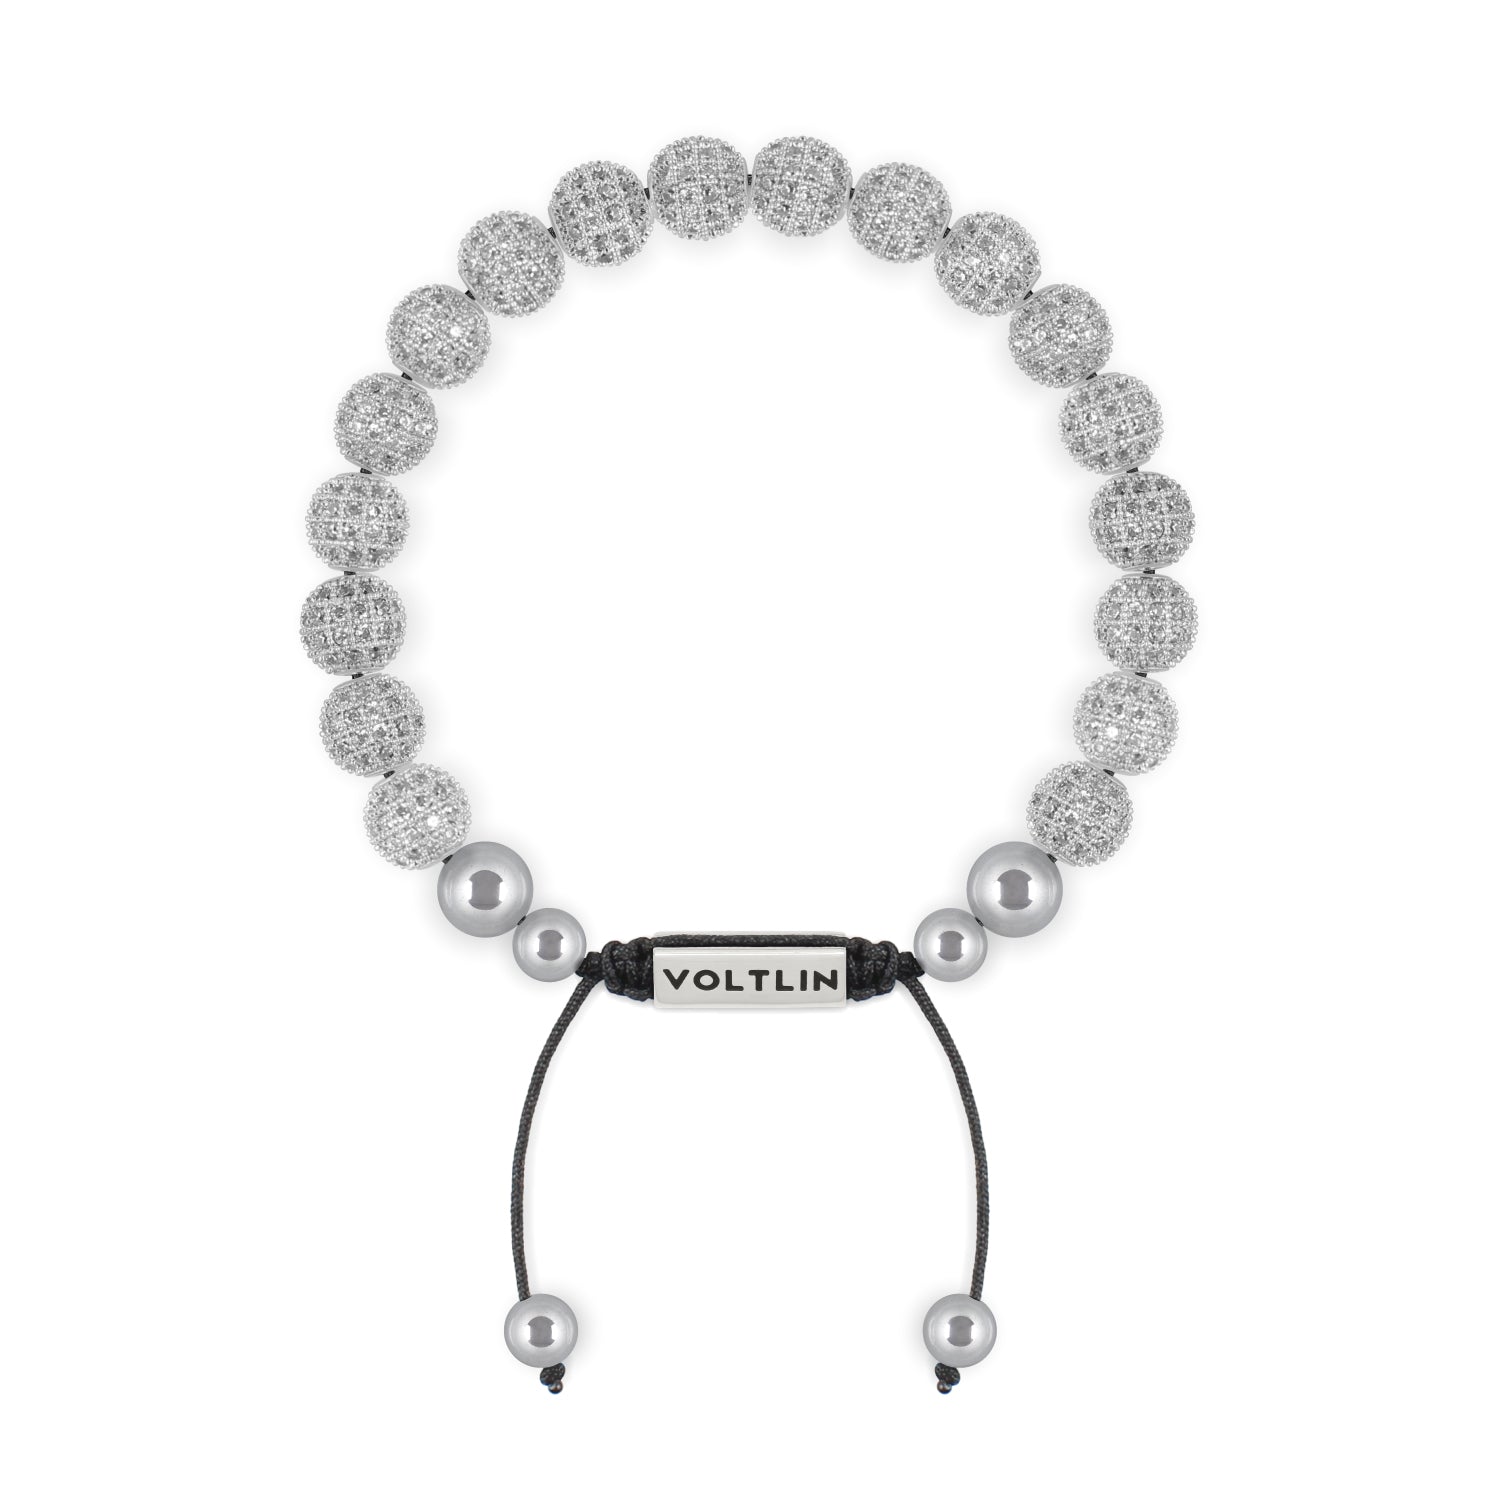 Front view of an 8mm Silver Pave beaded shamballa bracelet with silver stainless steel logo bead made by Voltlin